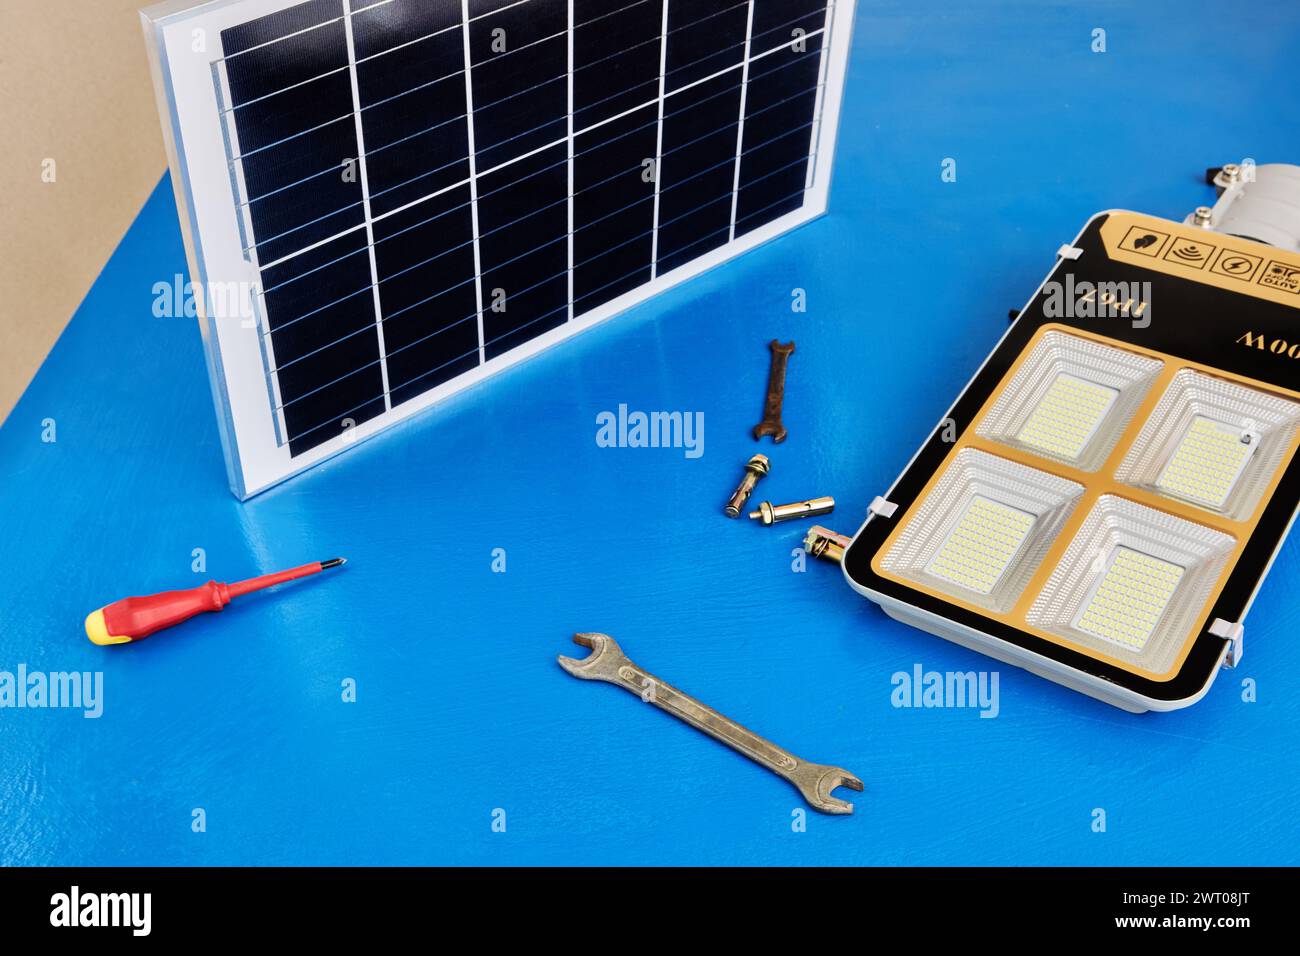 Standalone LED Street Lighting System with solar module for charging battery, assembly after purchase. Stock Photo